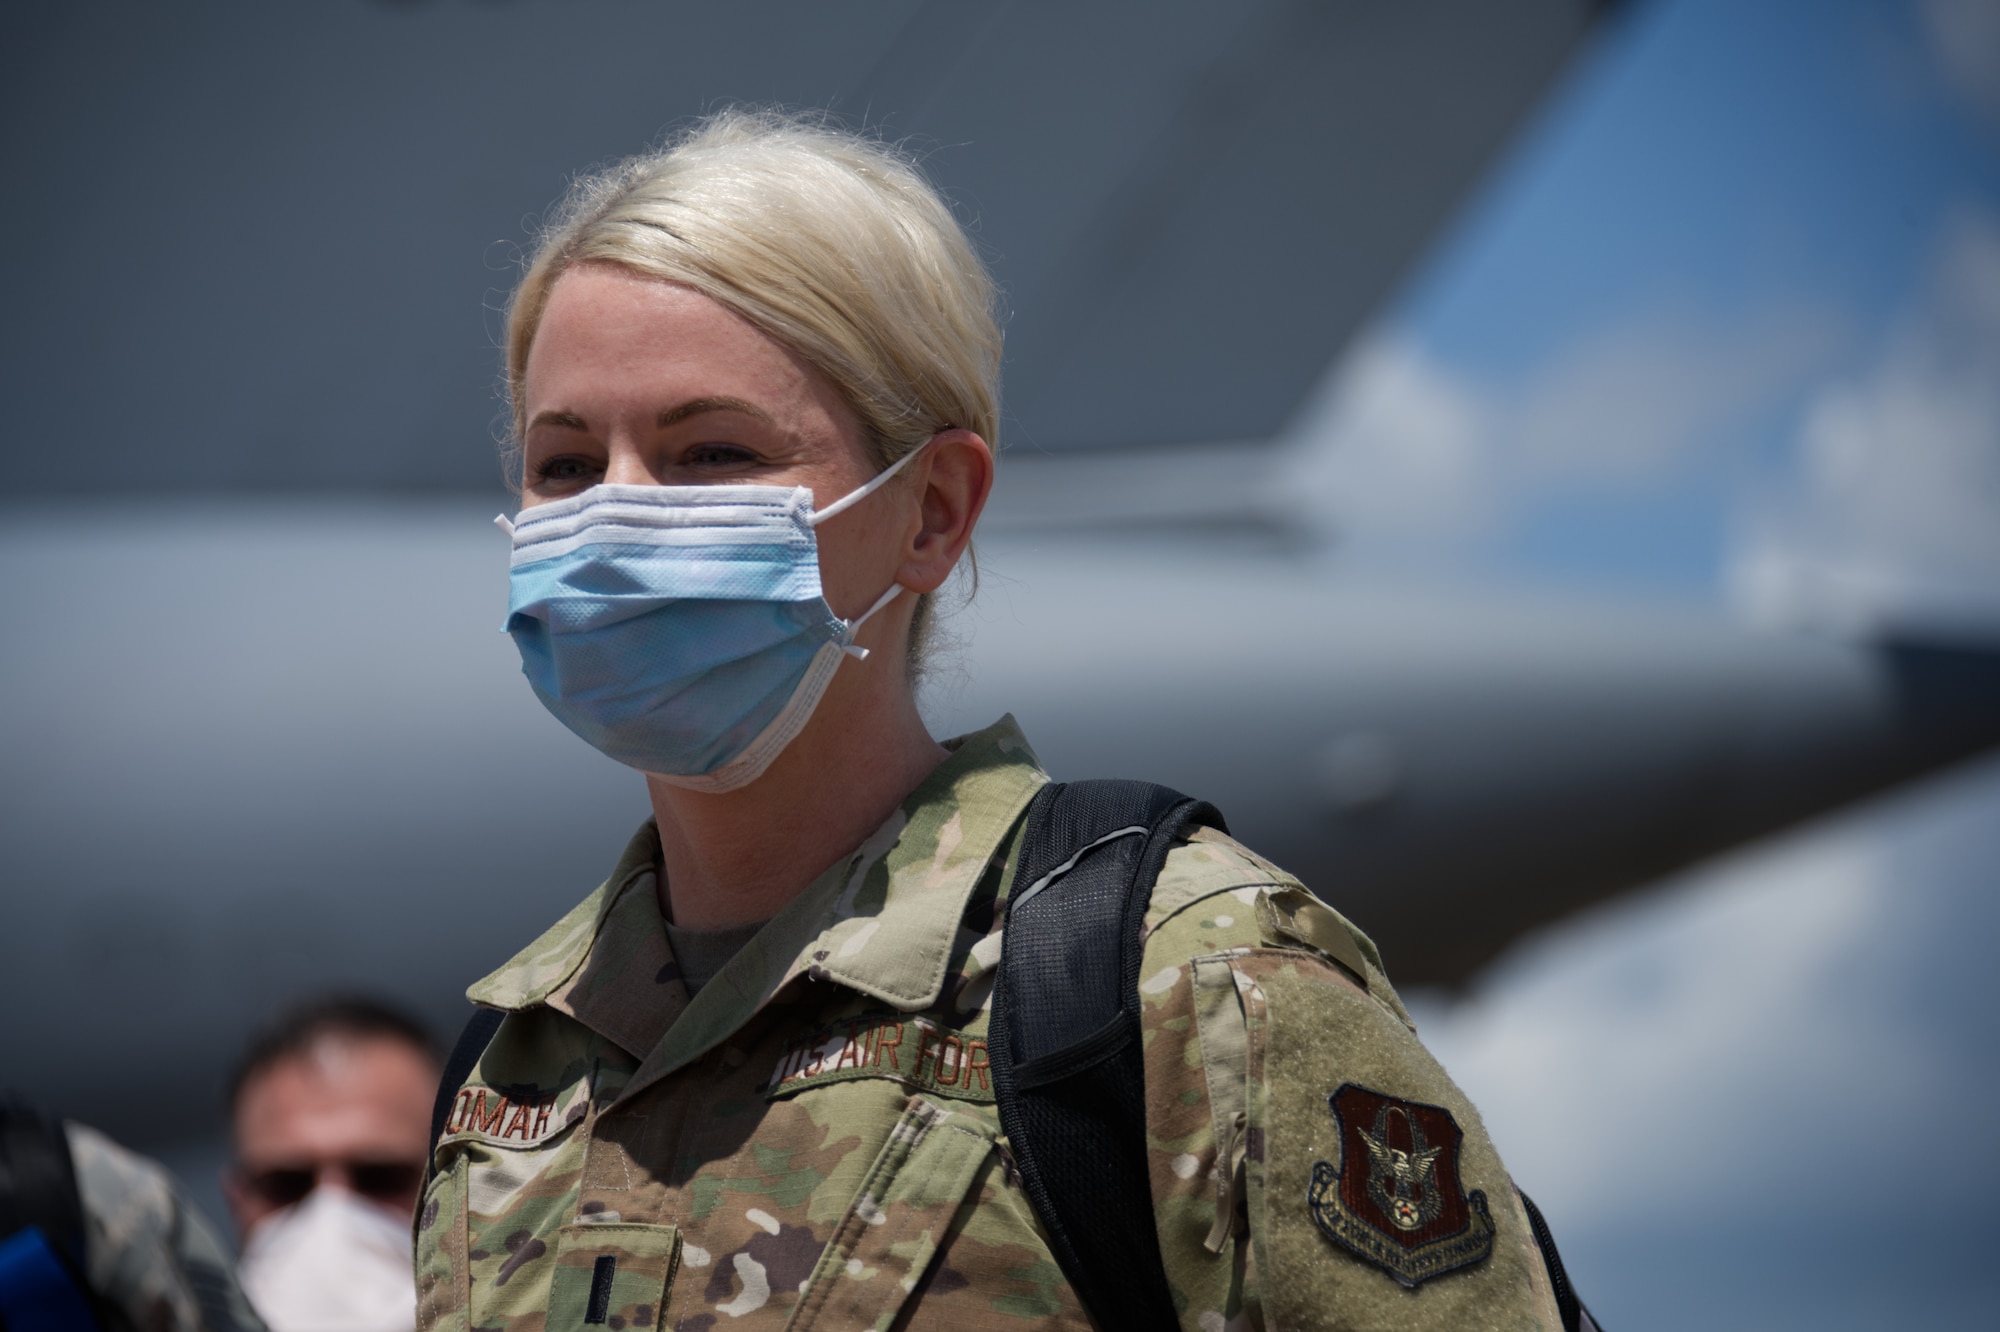 Airman stares across flight line while wearing mask.